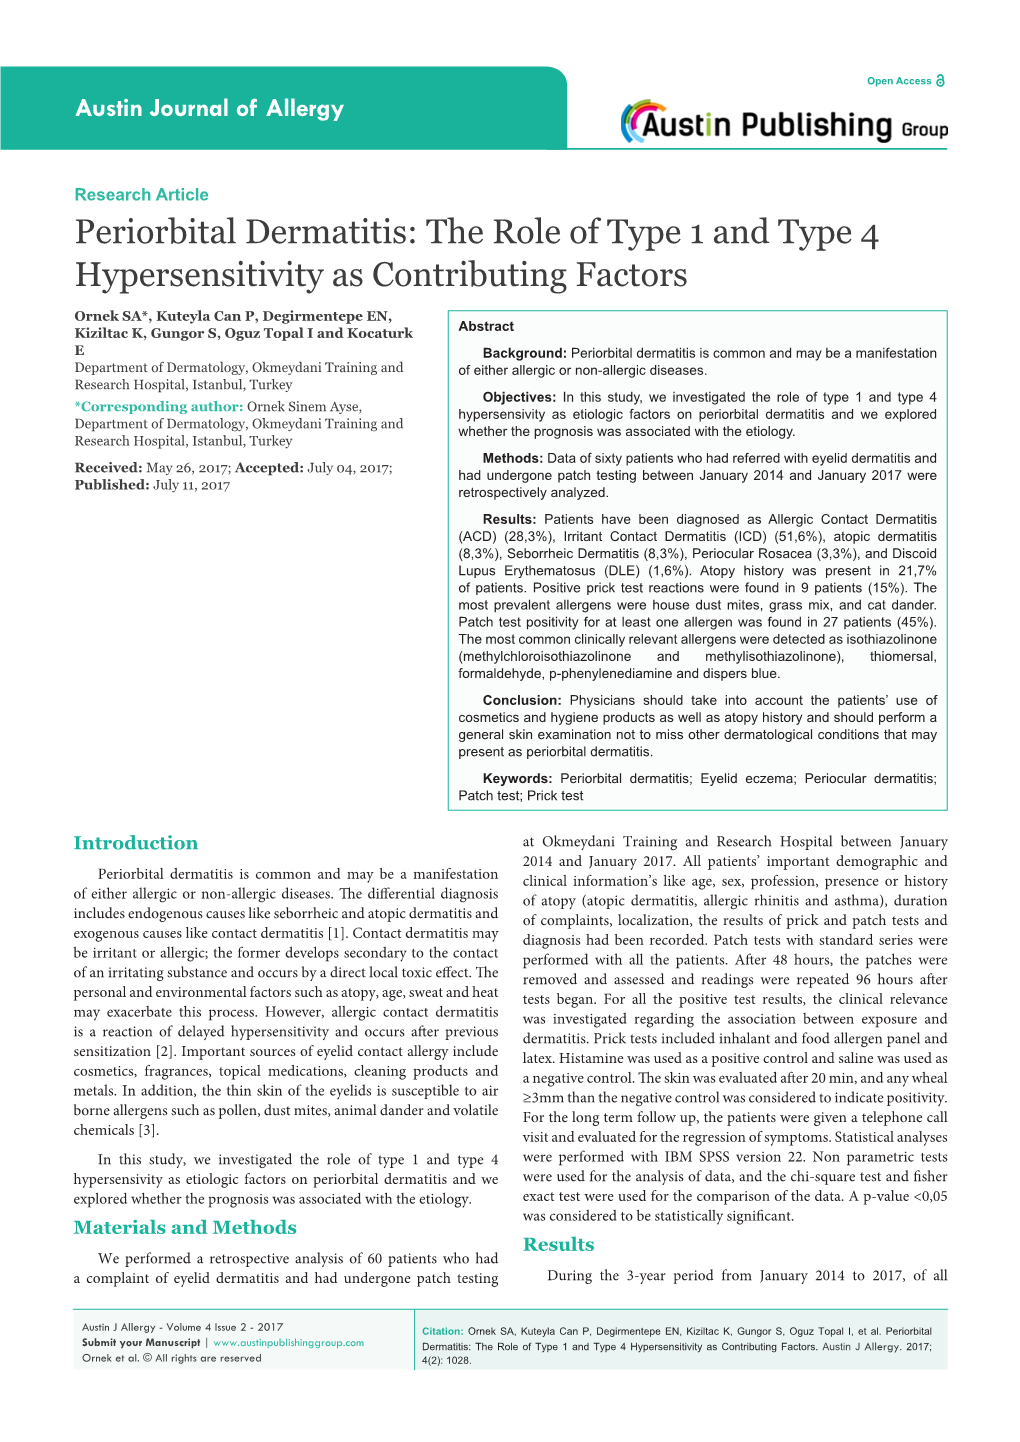 Periorbital Dermatitis: the Role of Type 1 and Type 4 Hypersensitivity As Contributing Factors